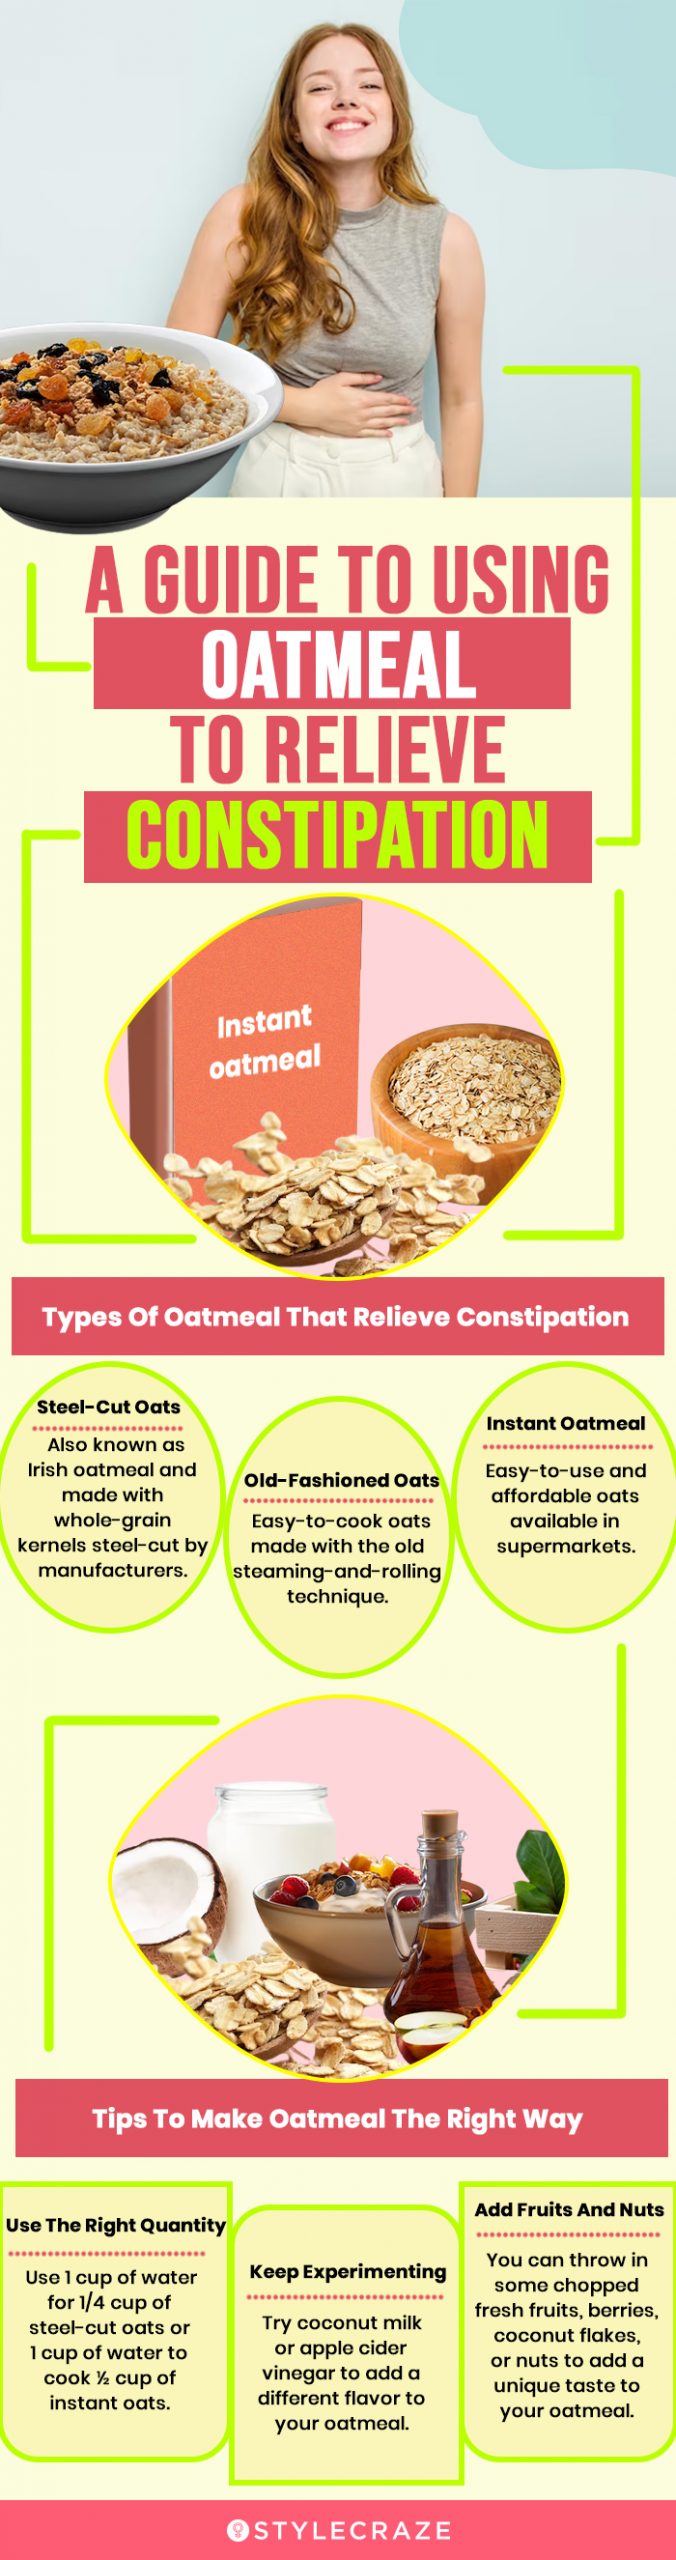 a guide on oatmeal to help relieve constipation (infographic)